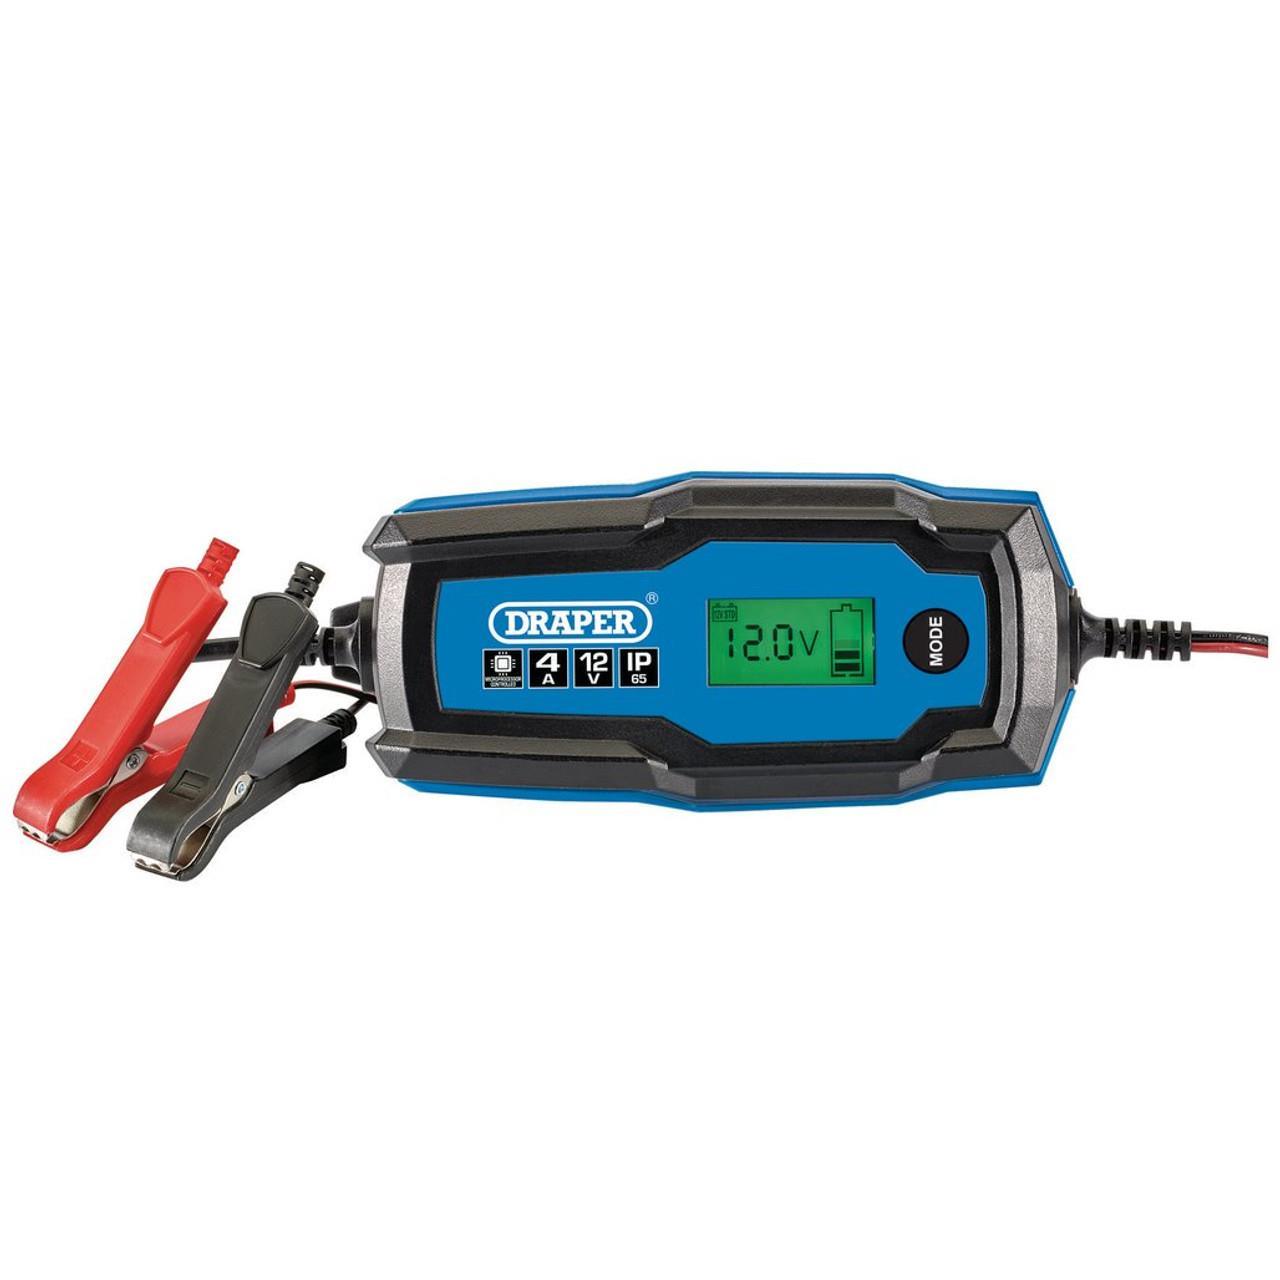 Draper 6V/12V Smart Charger and Battery Maintainer, 4A, Blue and Black 53489 - Tools 2U Direct SW